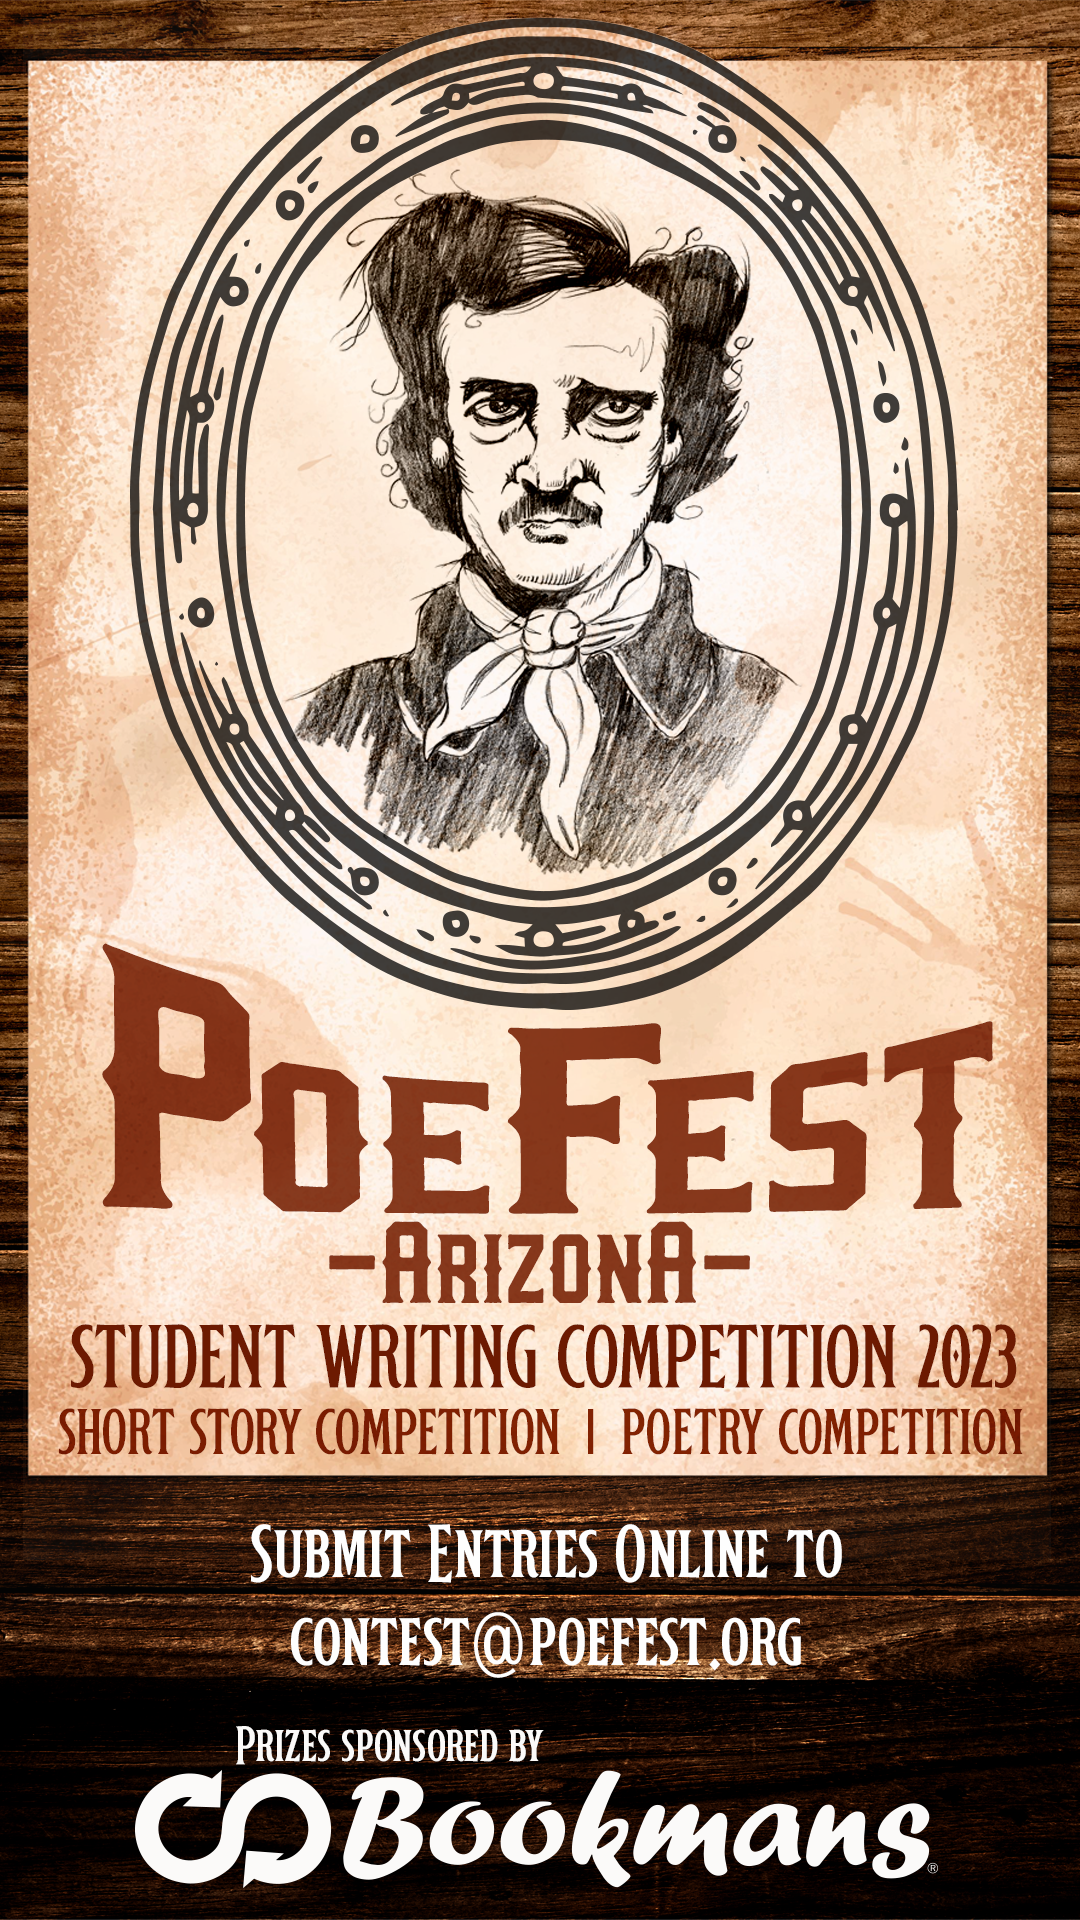 Student Writing Competition